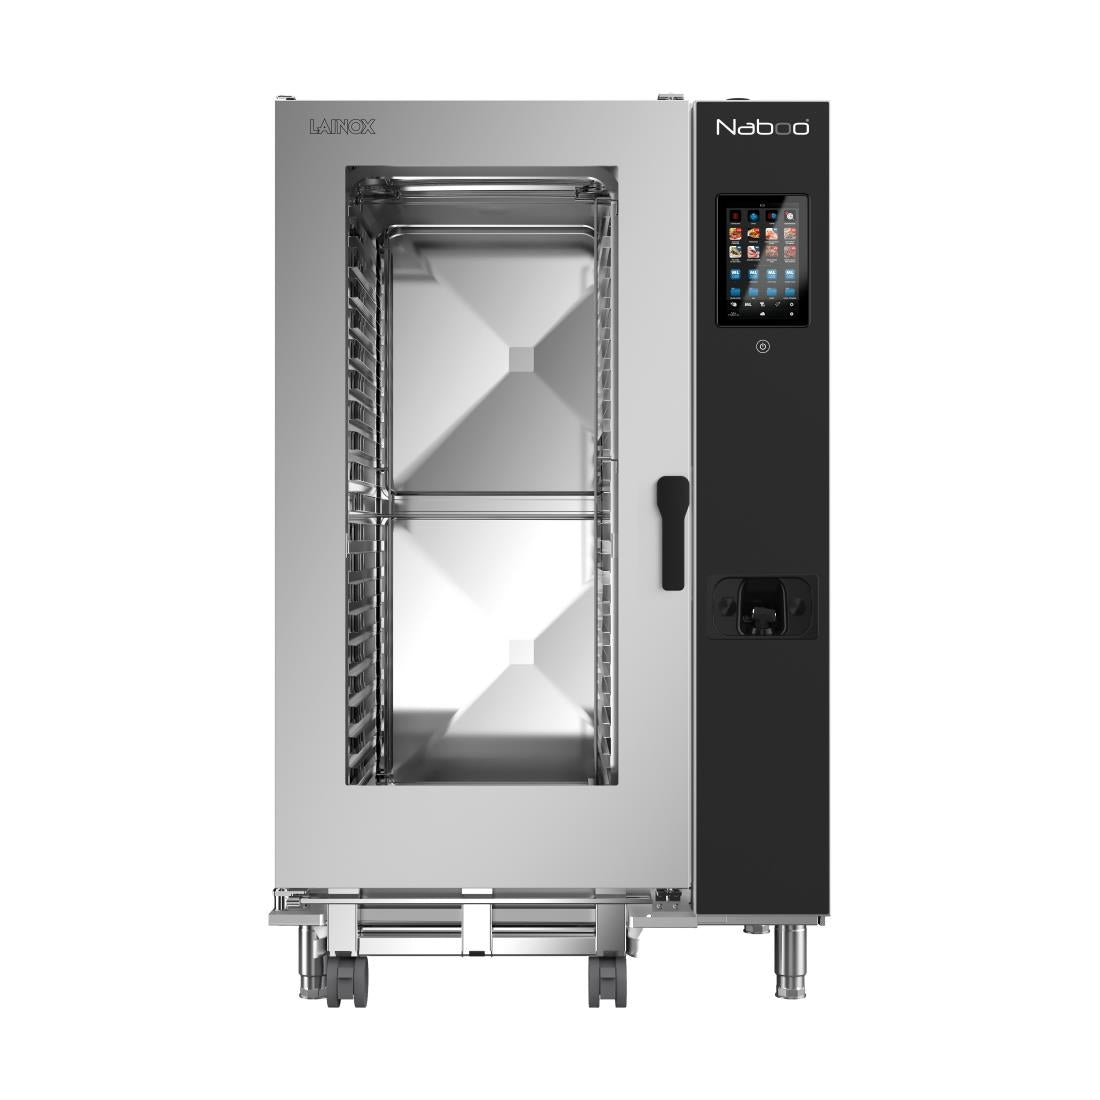 HP553 Lainox Naboo Boosted Gas Touch Screen Combi Oven NAG202BS 20X2/1GN JD Catering Equipment Solutions Ltd